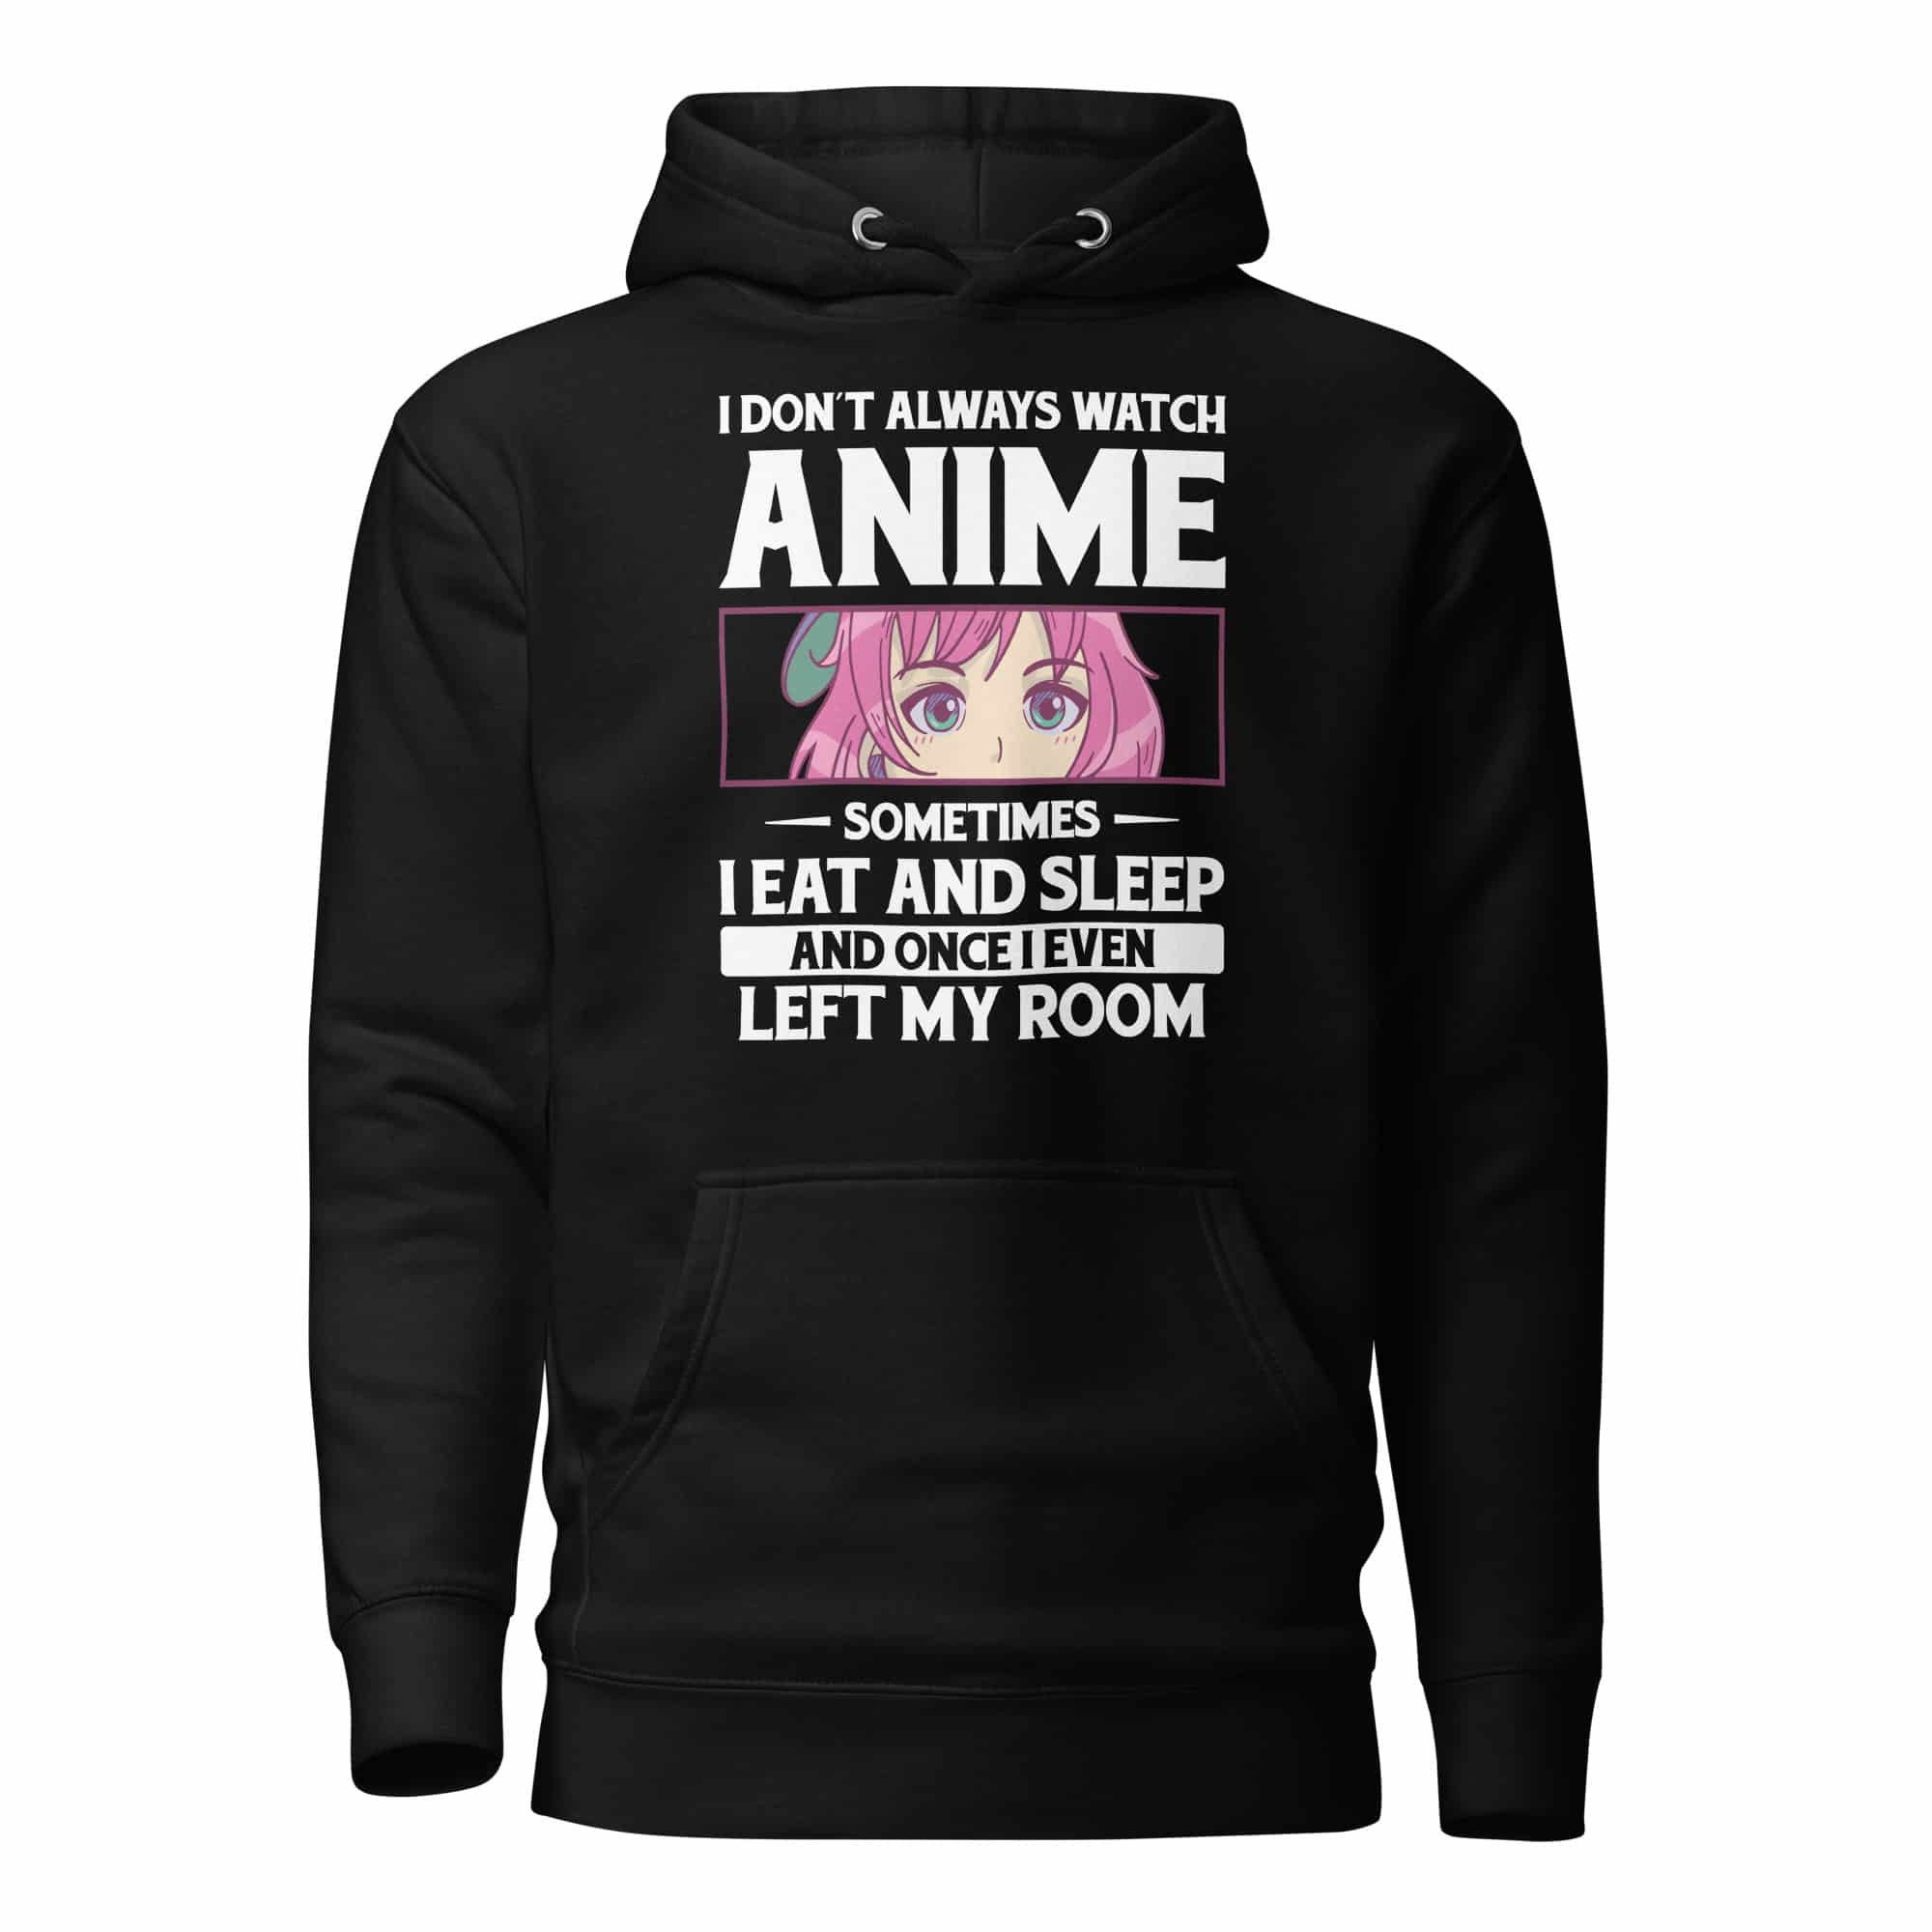 I Dont Always Watch Anime Unisex Hoodie Video game store Gaming merchandise Gaming accessories shop Online gaming store Video game shop near me Gaming console store PC gaming store Gaming gear shop Retro gaming shop Board game shop Anime merchandise Anime store online Japanese anime shop Anime figurines Manga shop Anime DVDs Anime accessories Anime apparel Anime collectibles Anime gifts